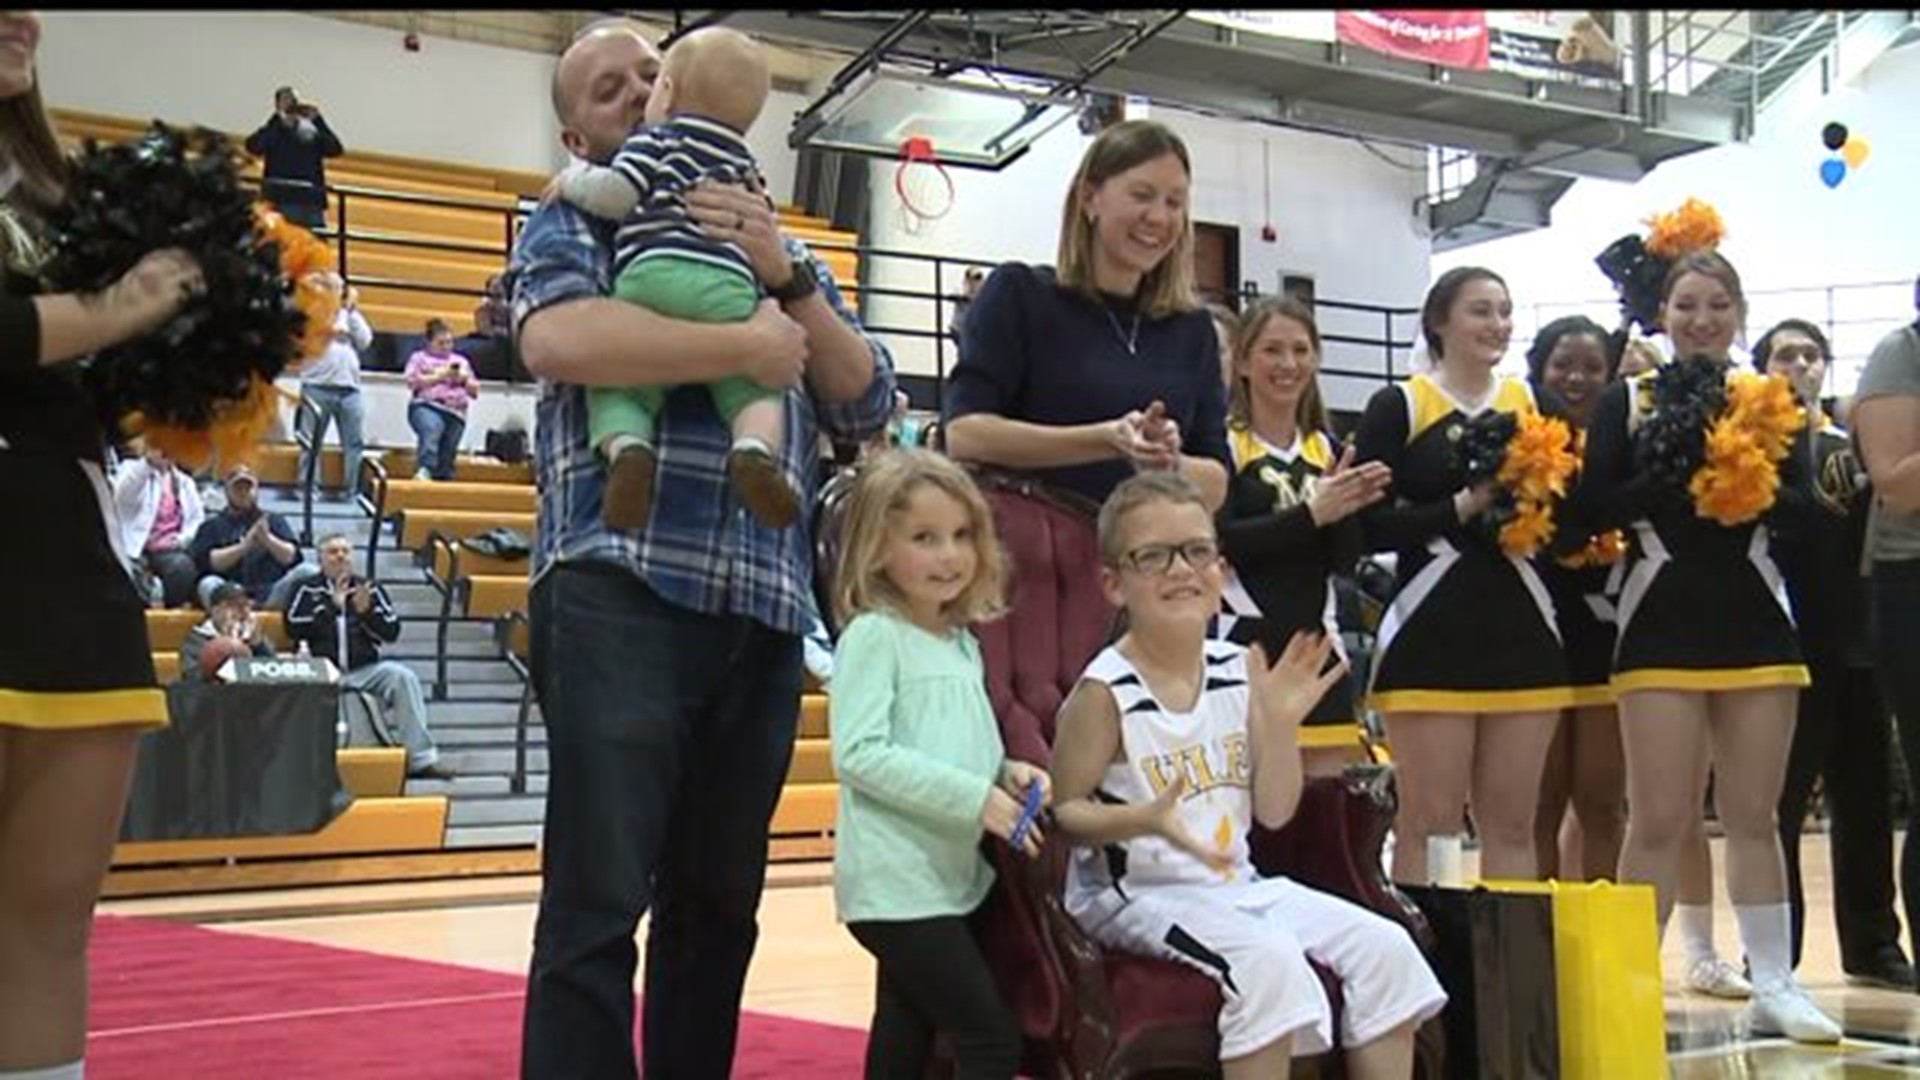 Local boy receives a very special welcome at Millersville basketball game